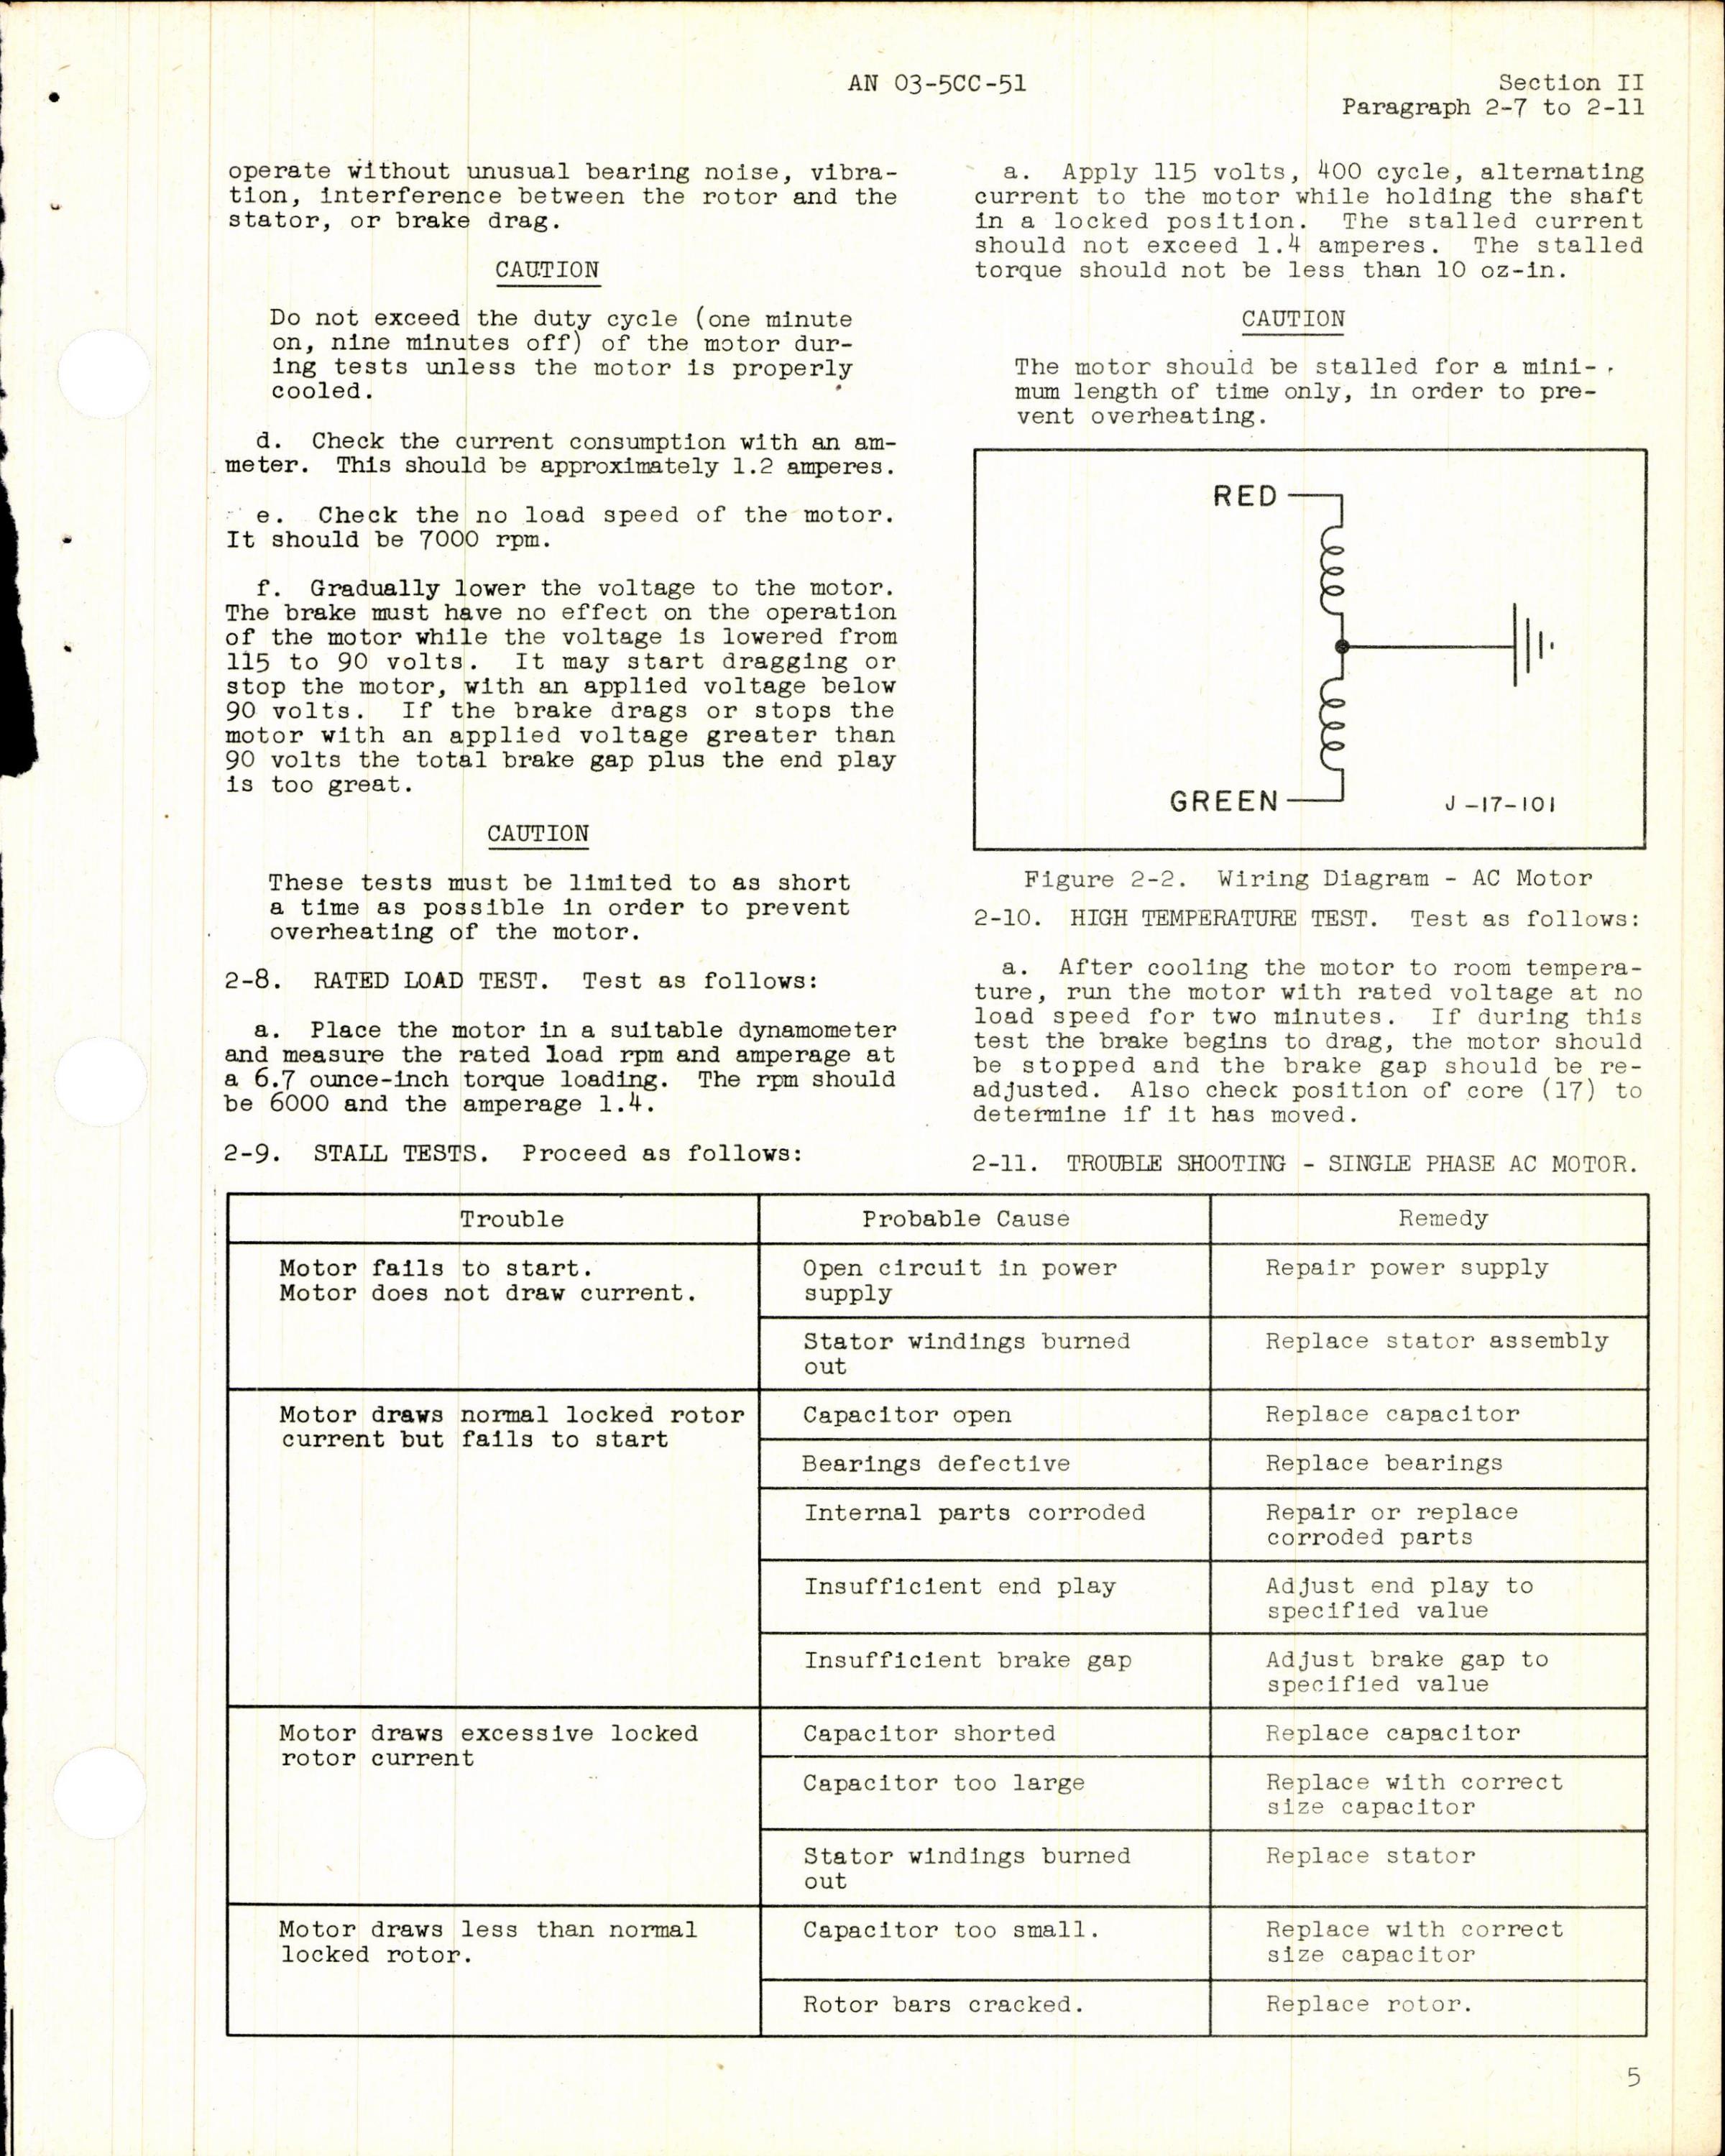 Sample page 7 from AirCorps Library document: Overhaul Instructions for Airesearch Electric Motors